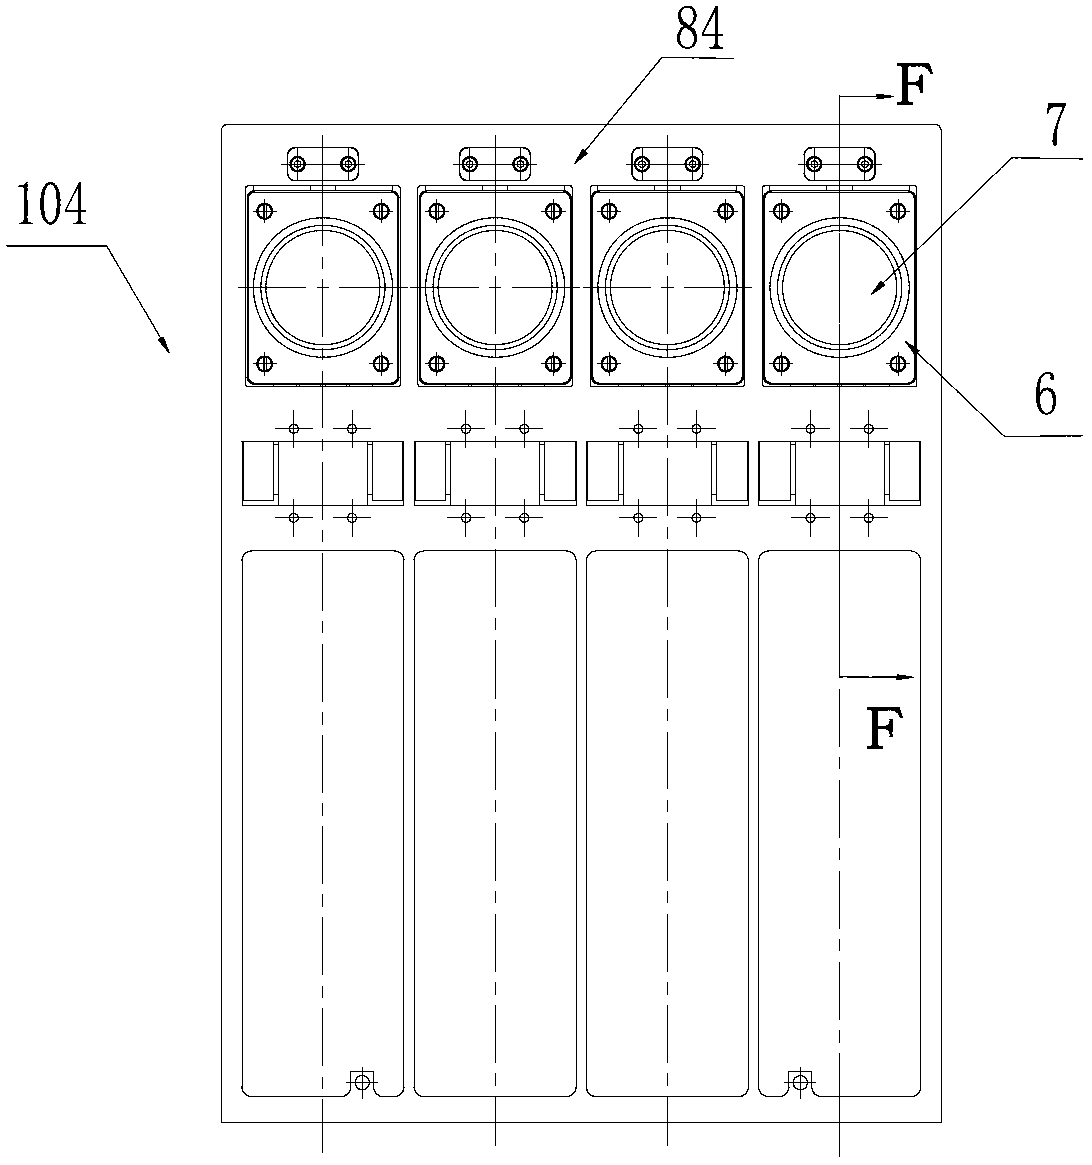 Control system for DNA (Deoxyribose Nucleic Acid) sequencer